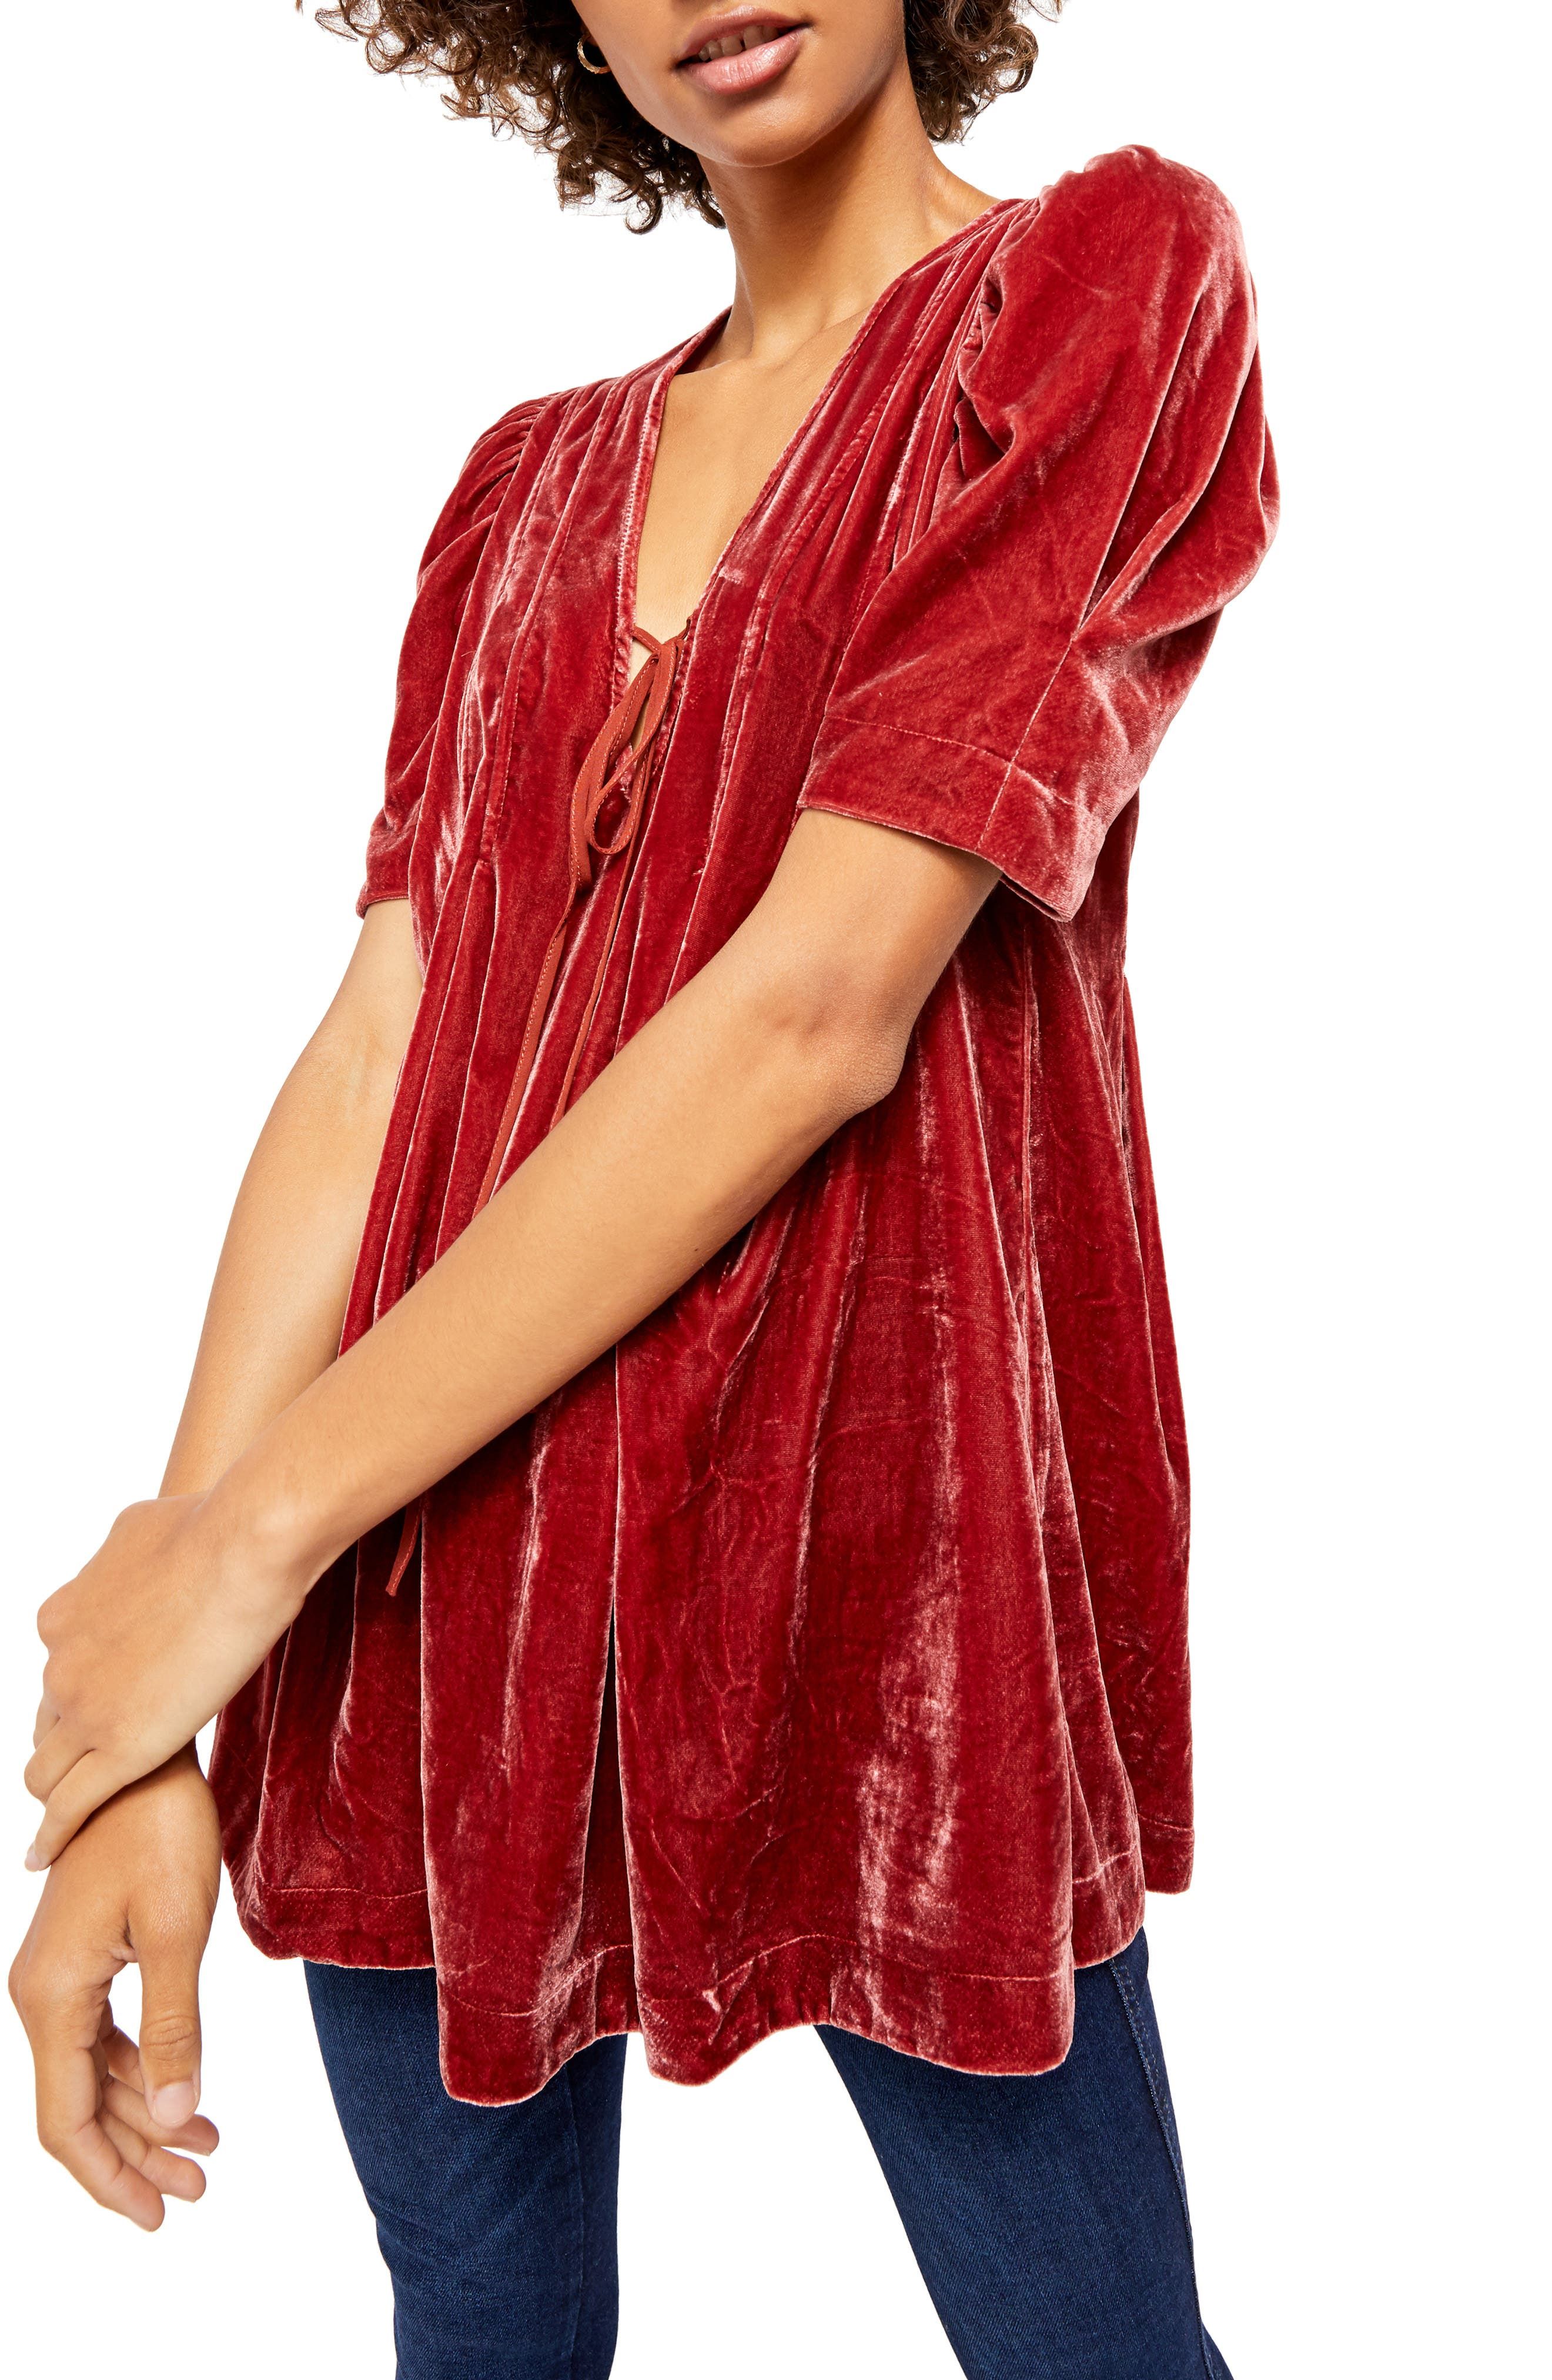 Color: Reds Size Type: Regular Size (Women's): XS Sleeve Length: Short Sleeve Type: Blouse Style: Tunic Neckline: V-Neck Pattern: Solid Theme: Classic Material: Rayon